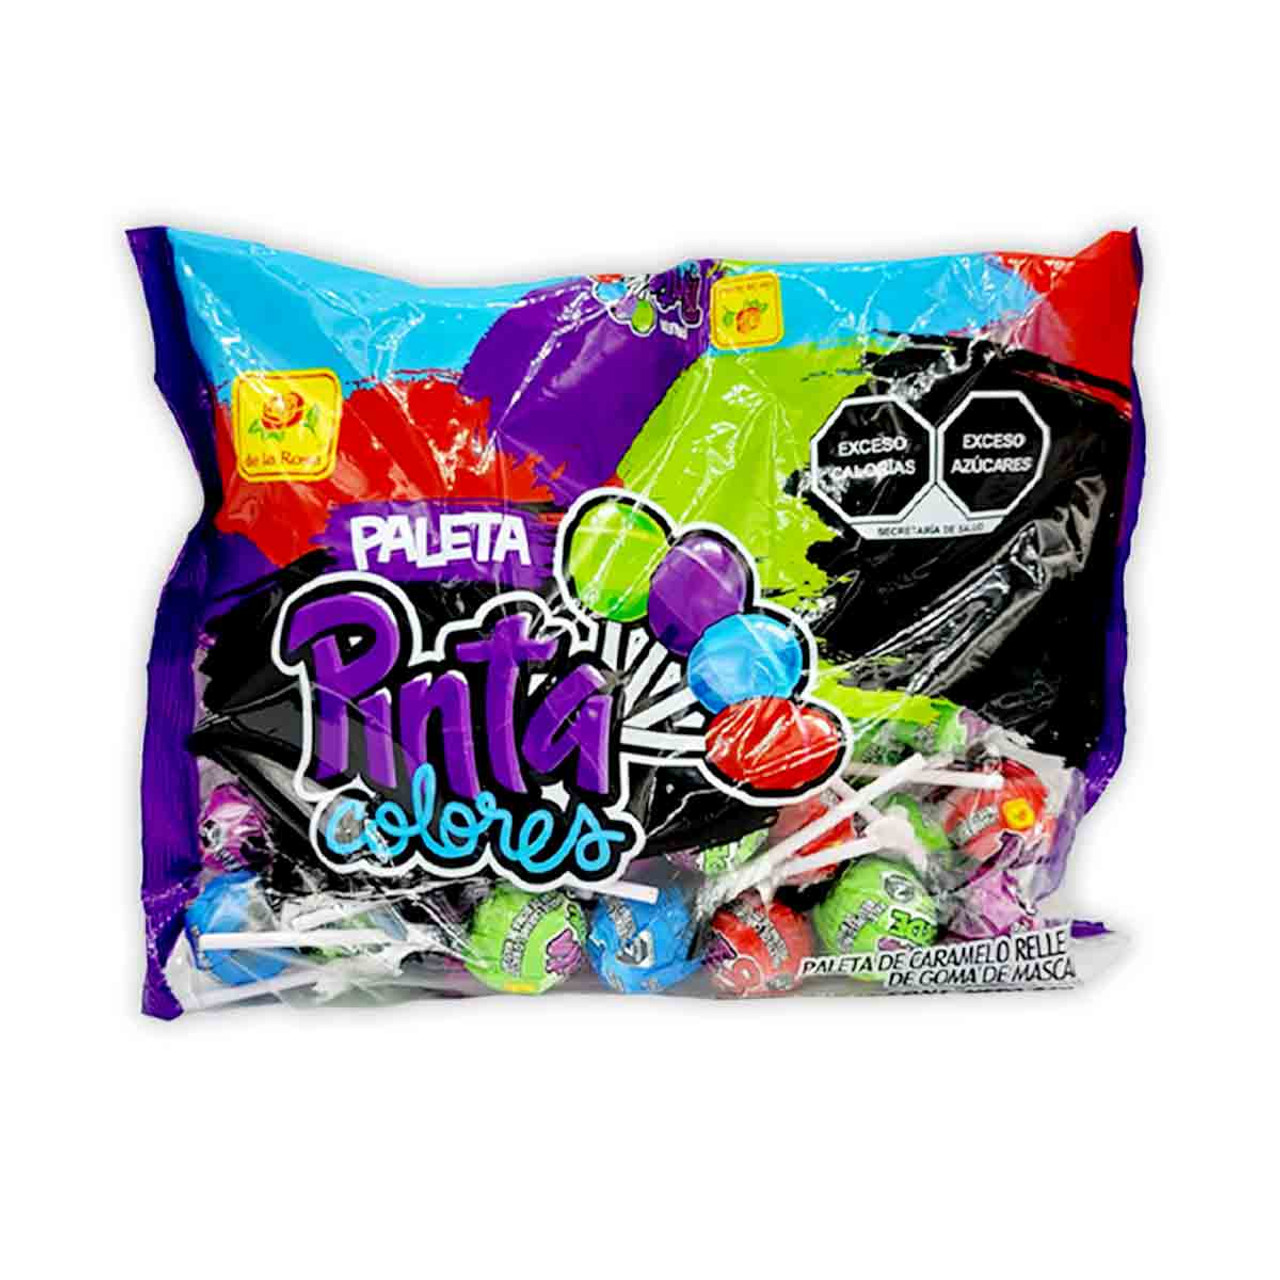 Package with fifty different hard candy colorful lollipops that will leave you with a sweet and fruity flavor. The lollipops are known as "Pinta Colores" from "De la Rosa" in its Jumbo size.